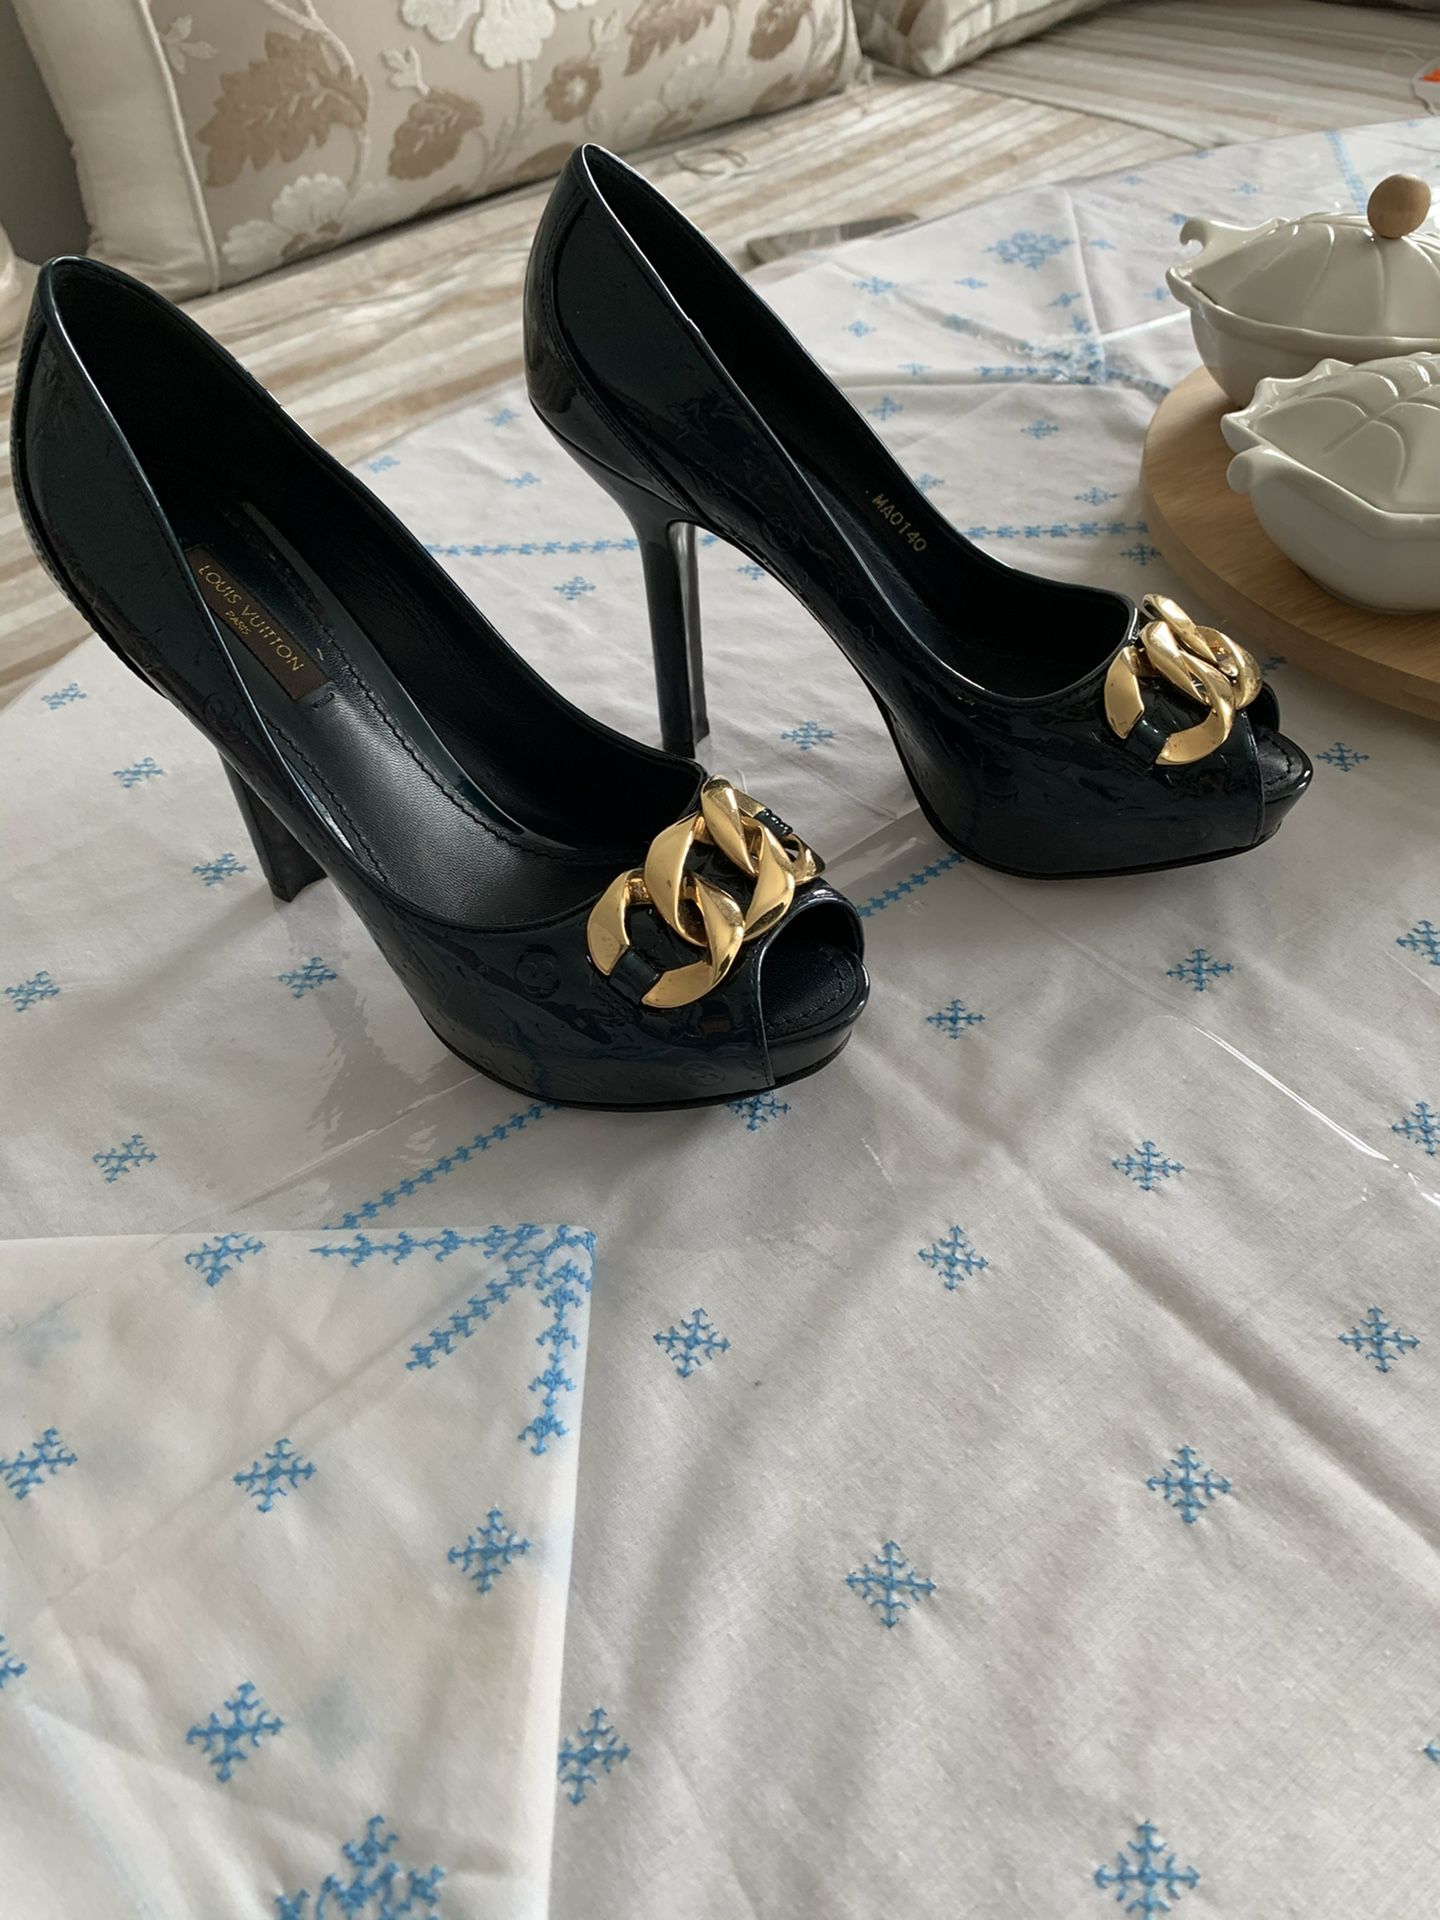 Authentic Louis Vuitton Heels for Sale in New York, NY - OfferUp